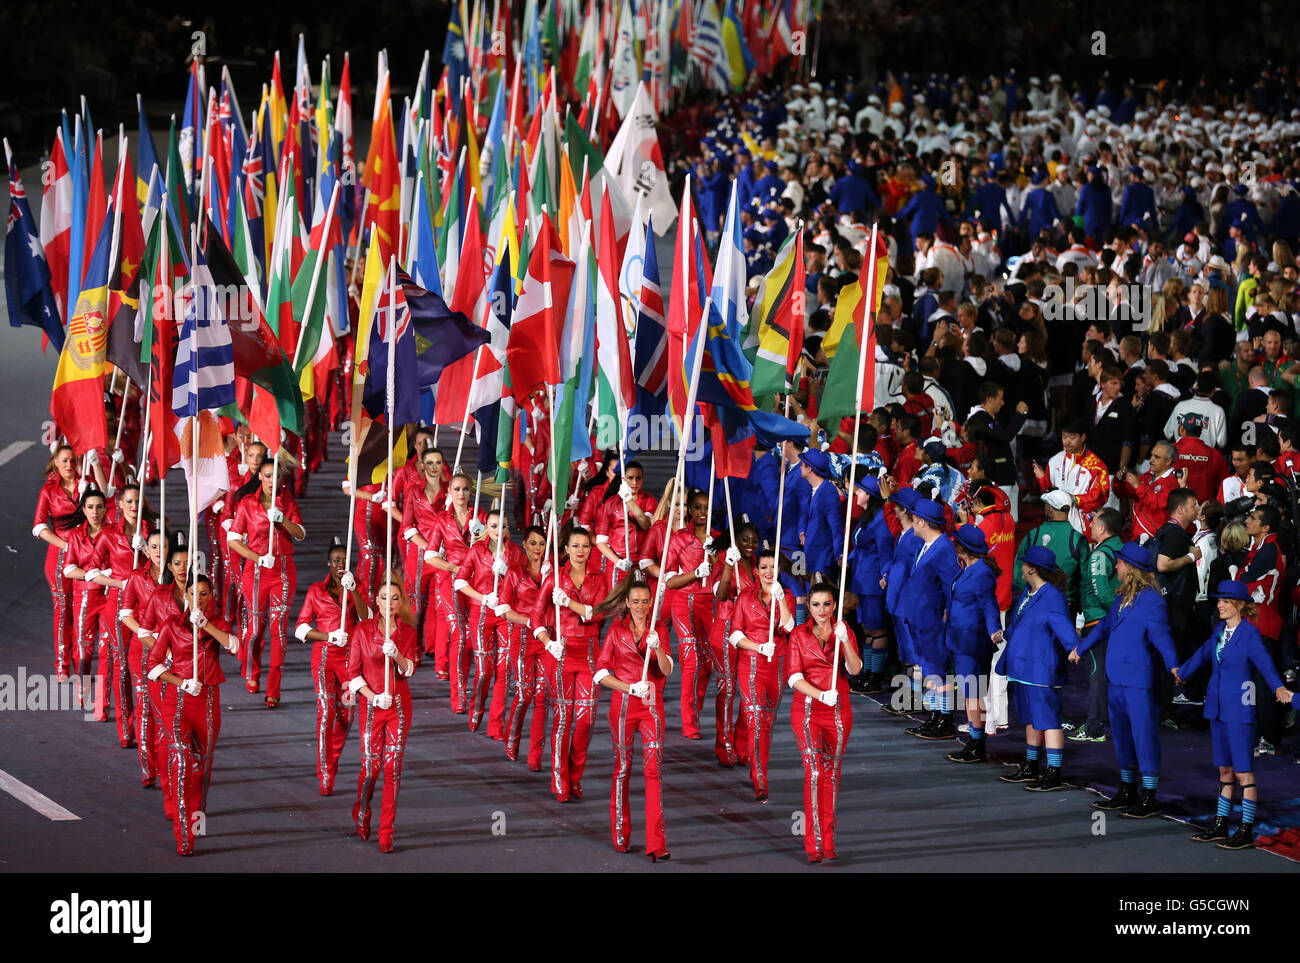 The flags of competing nations during the Closing Ceremony of the London 2012 London Olympics at the Olympic Stadium. Stock Photo